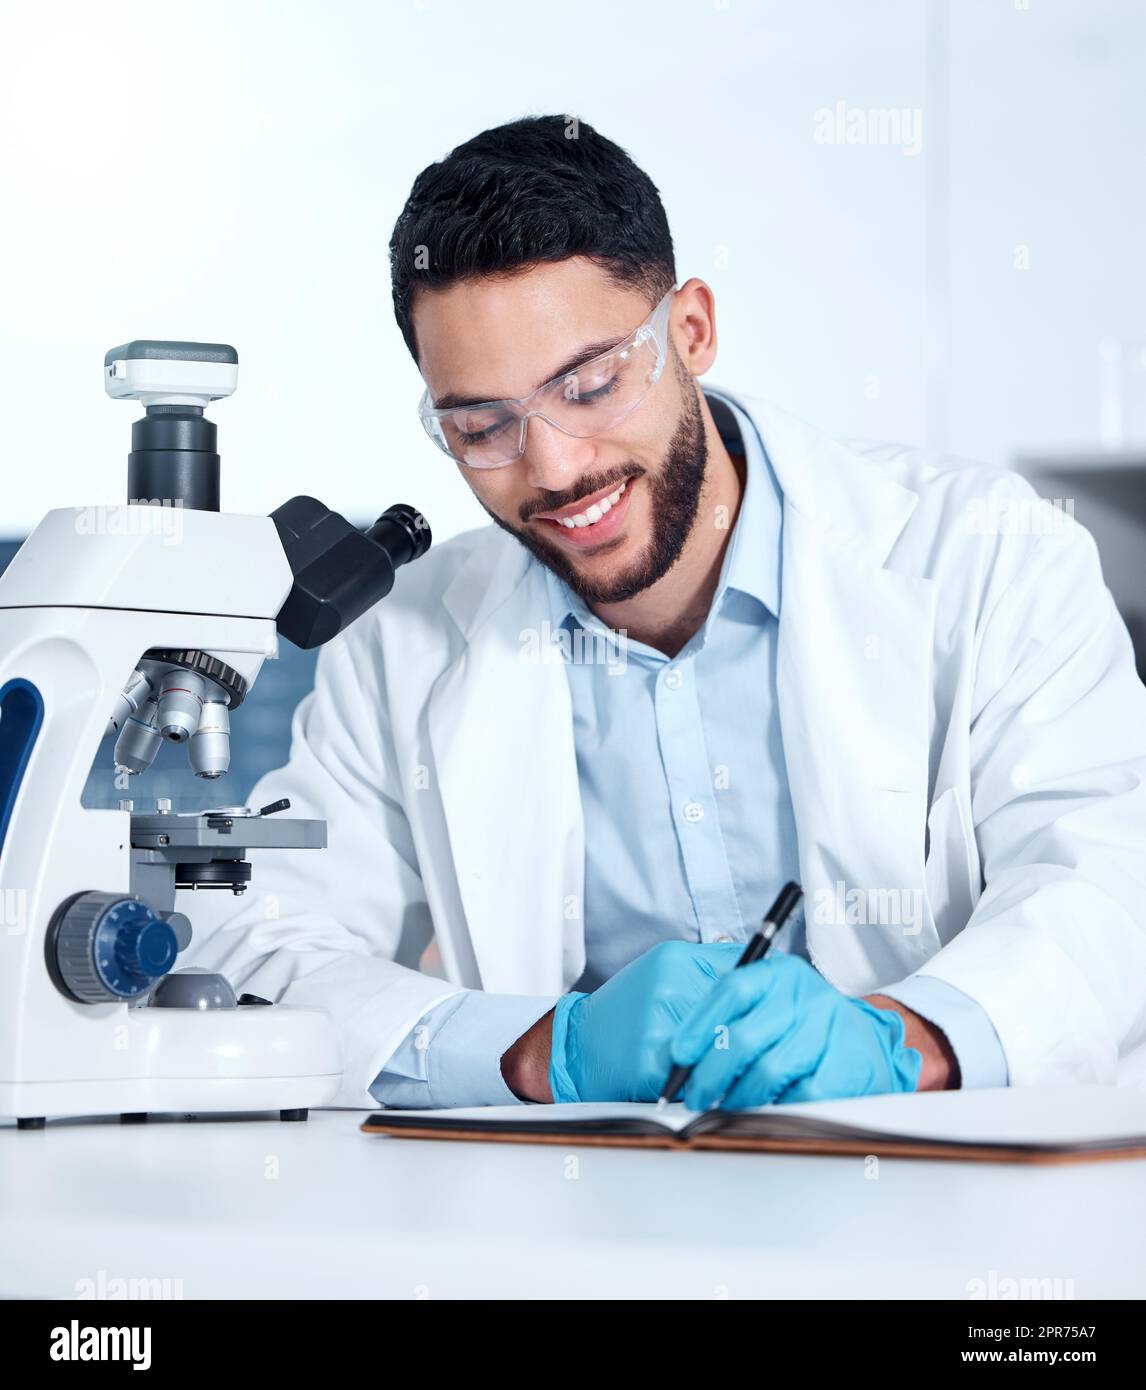 One handsome young mixed race man wearing gloves and a labcoat and looking at medical samples on a microscope in a lab. A male scientist wearing safety goggles and smiling while writing in a notebook Stock Photo